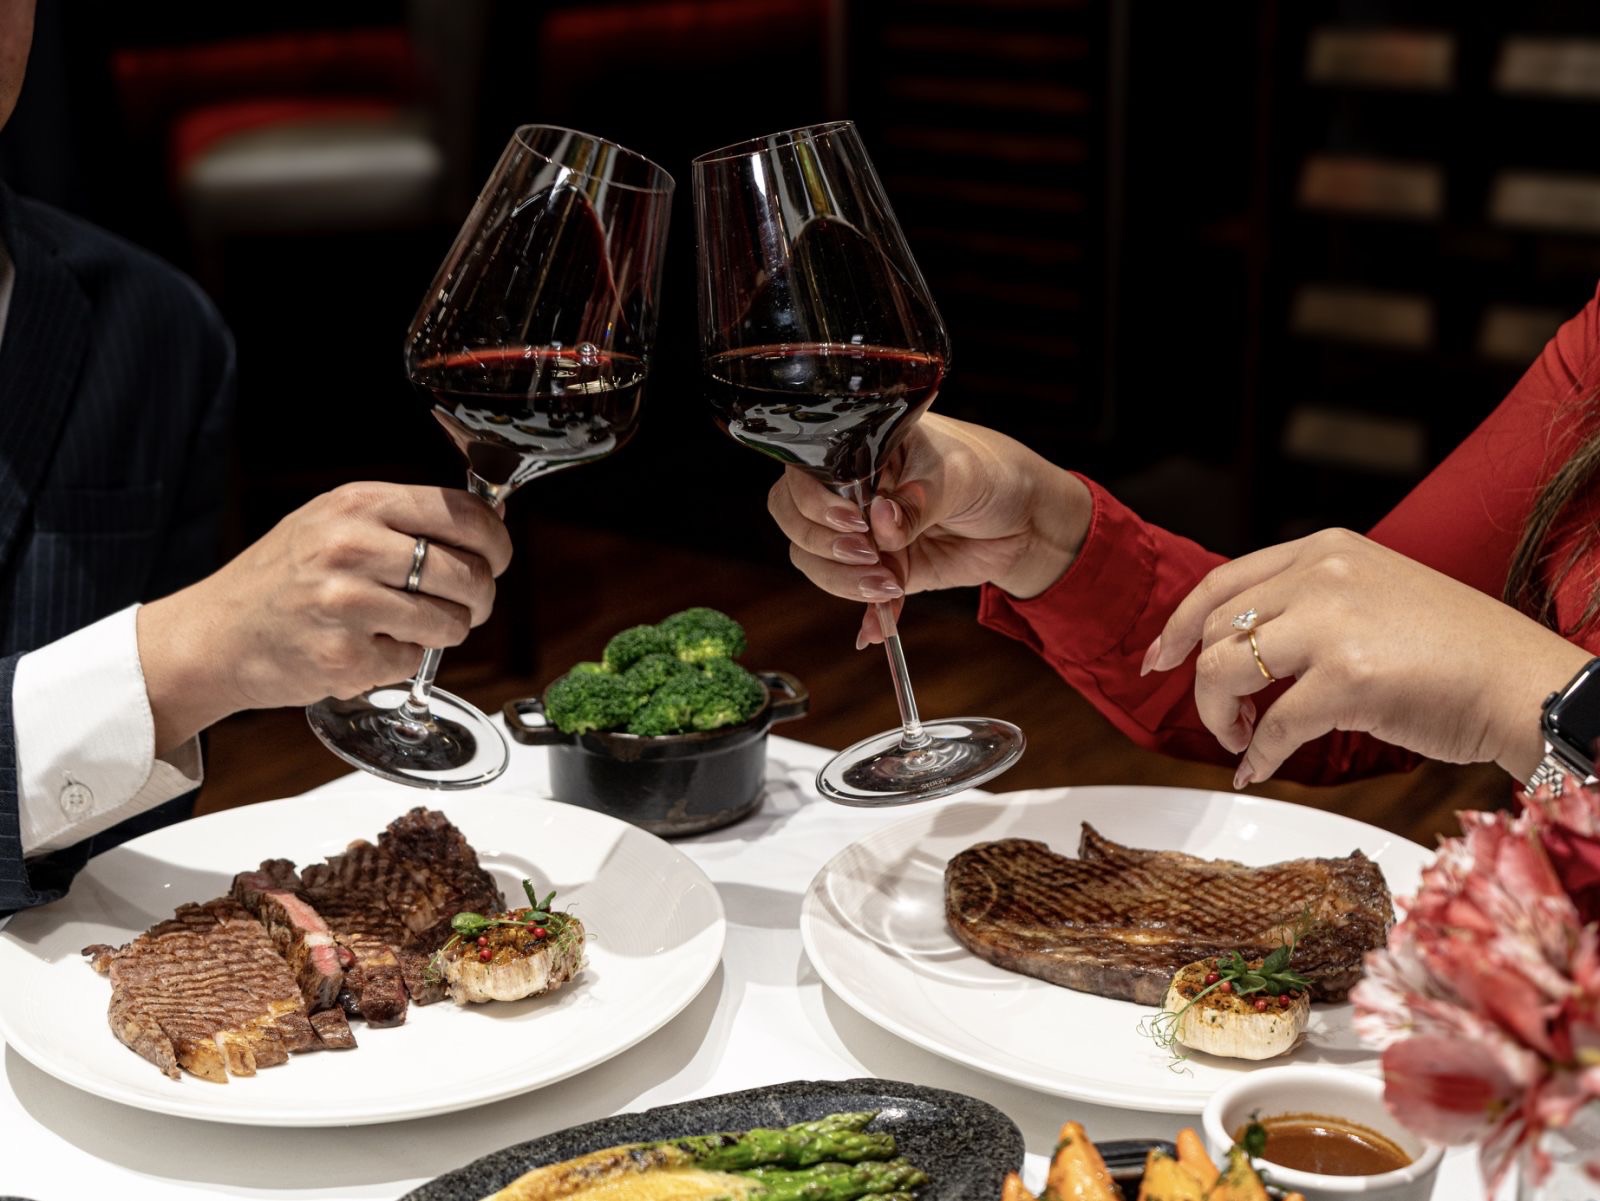 A lovely Valentine’s day meal for two at Cru Steakhouse